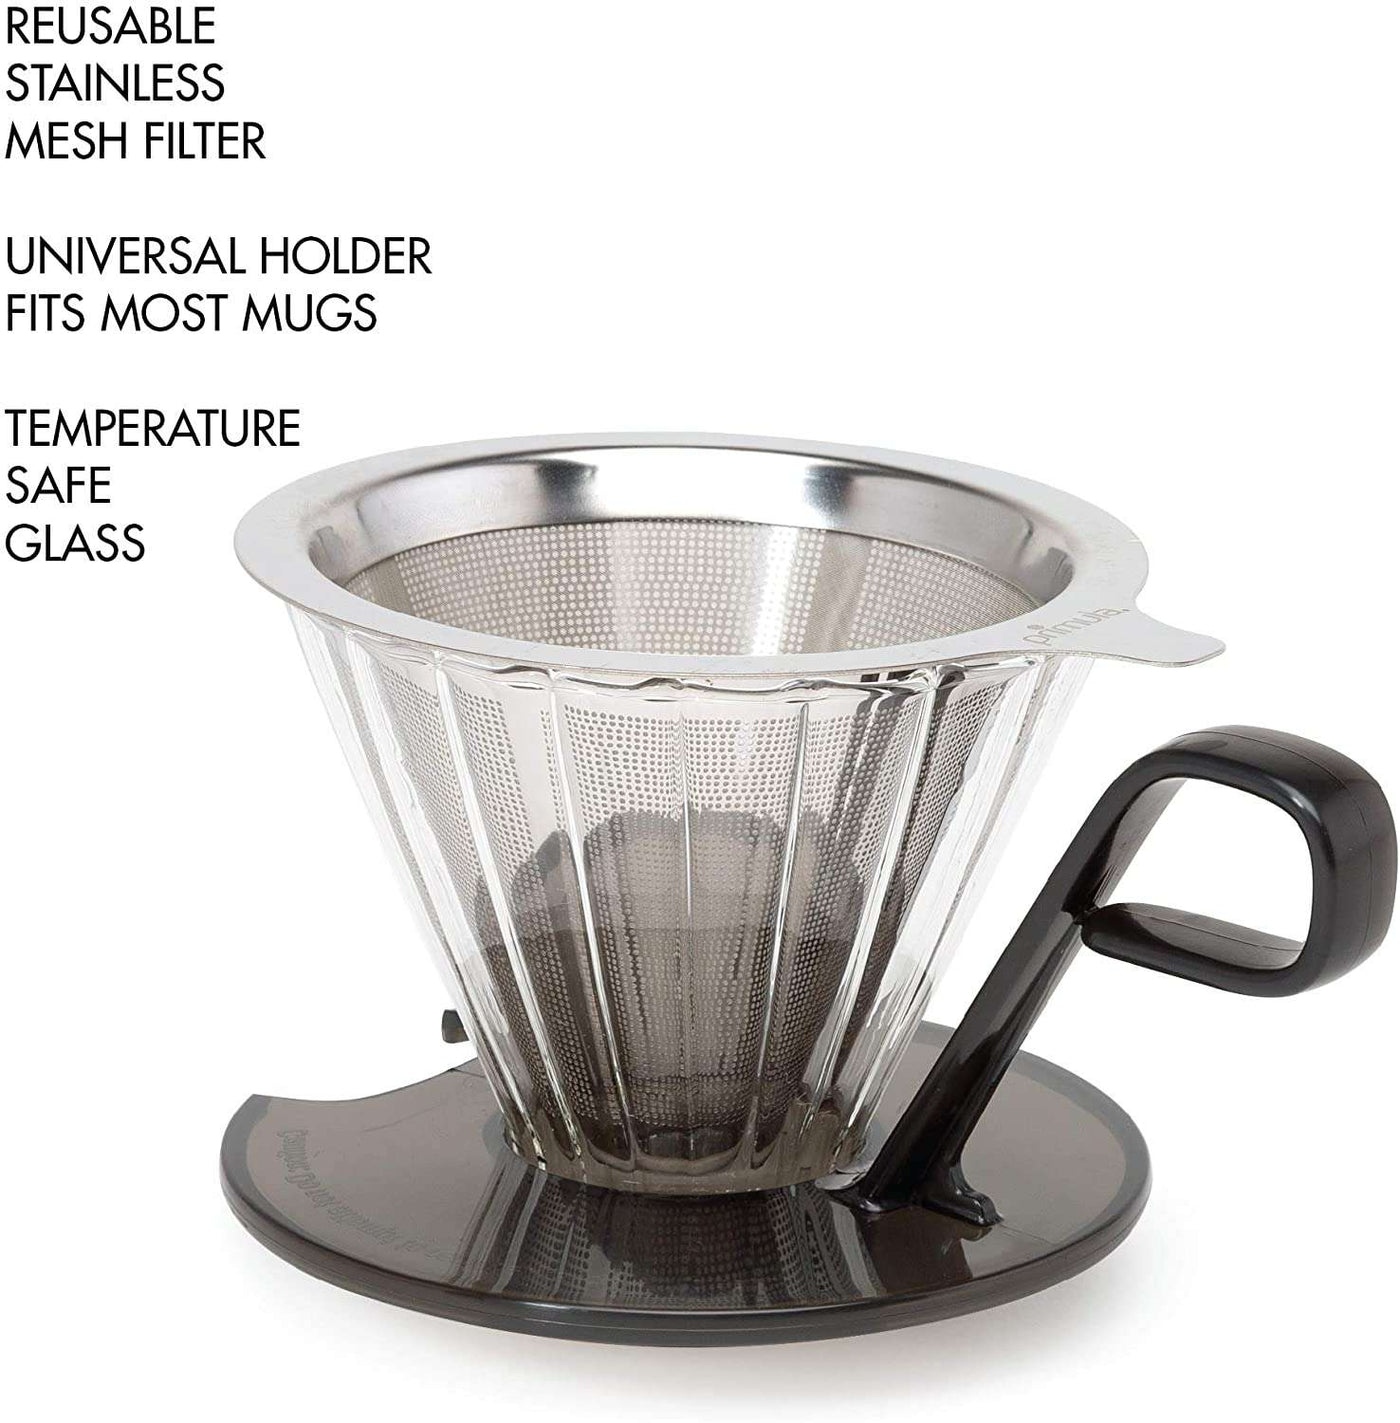 Primula Stovetop Coffee Percolator, Premium Stainless Steel Coffee Maker  with Reusable Filter Basket, Non-Drip Spout, Glass Knob Brew Indicator and